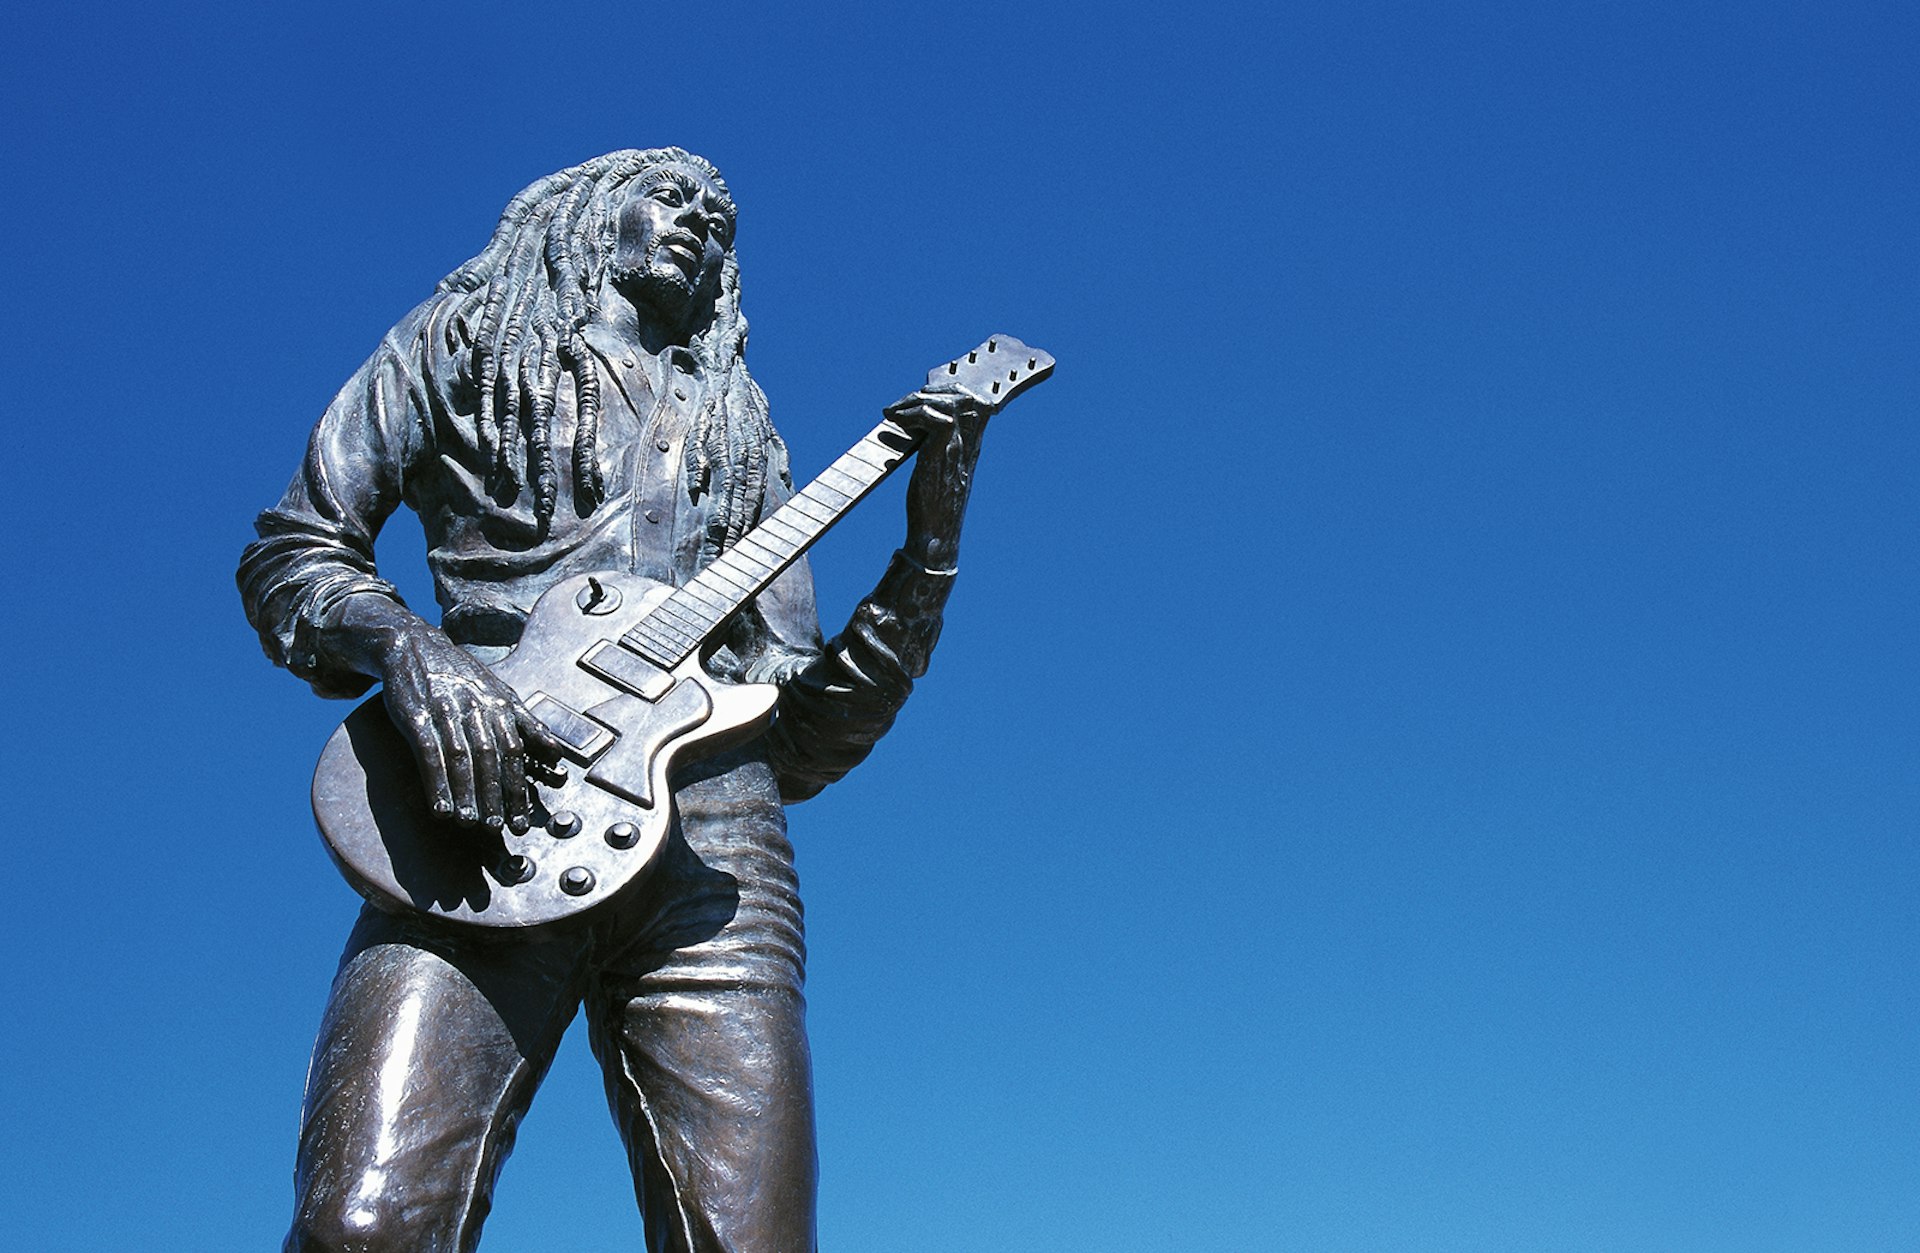 Features - Statue of Jamaican reggae singer and musician Bob Marley (1945-1981), Kingston, Jamaica